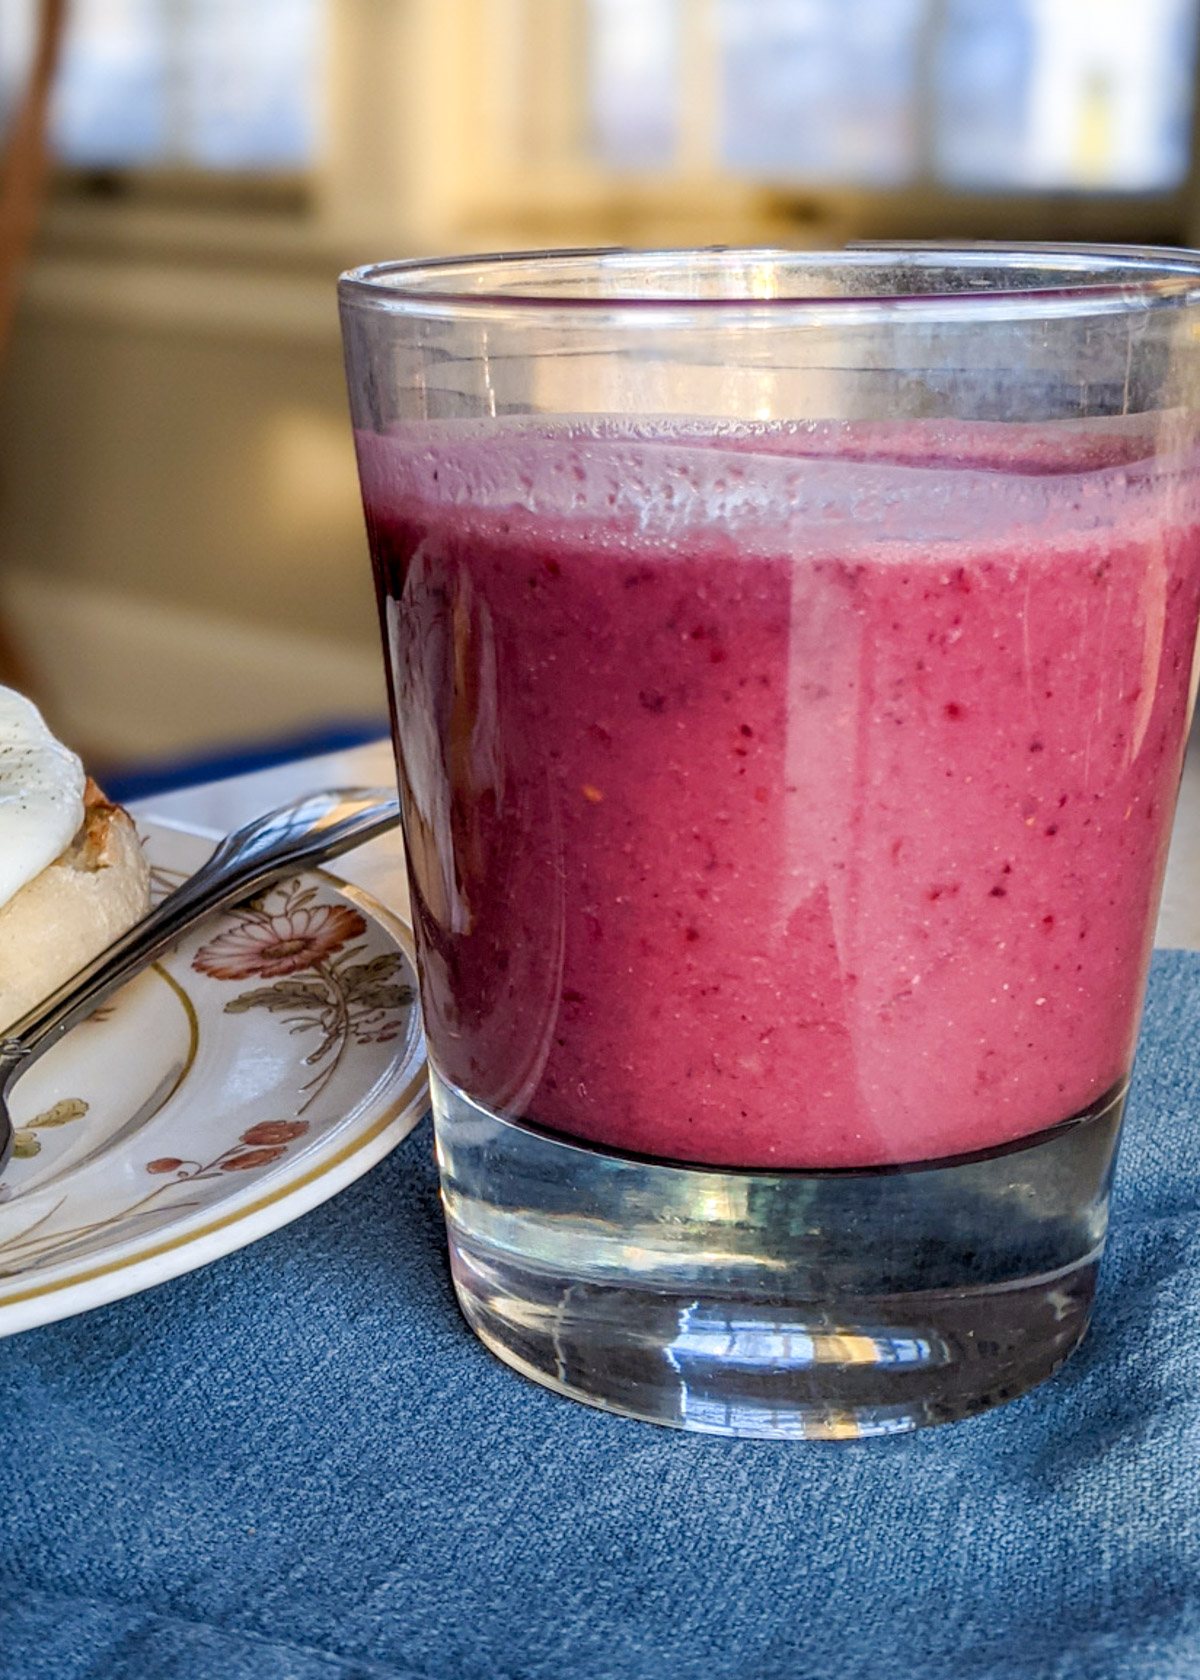 Protein mixed berry smoothie for breakfast on a blue napkin next to a plate of eggs.